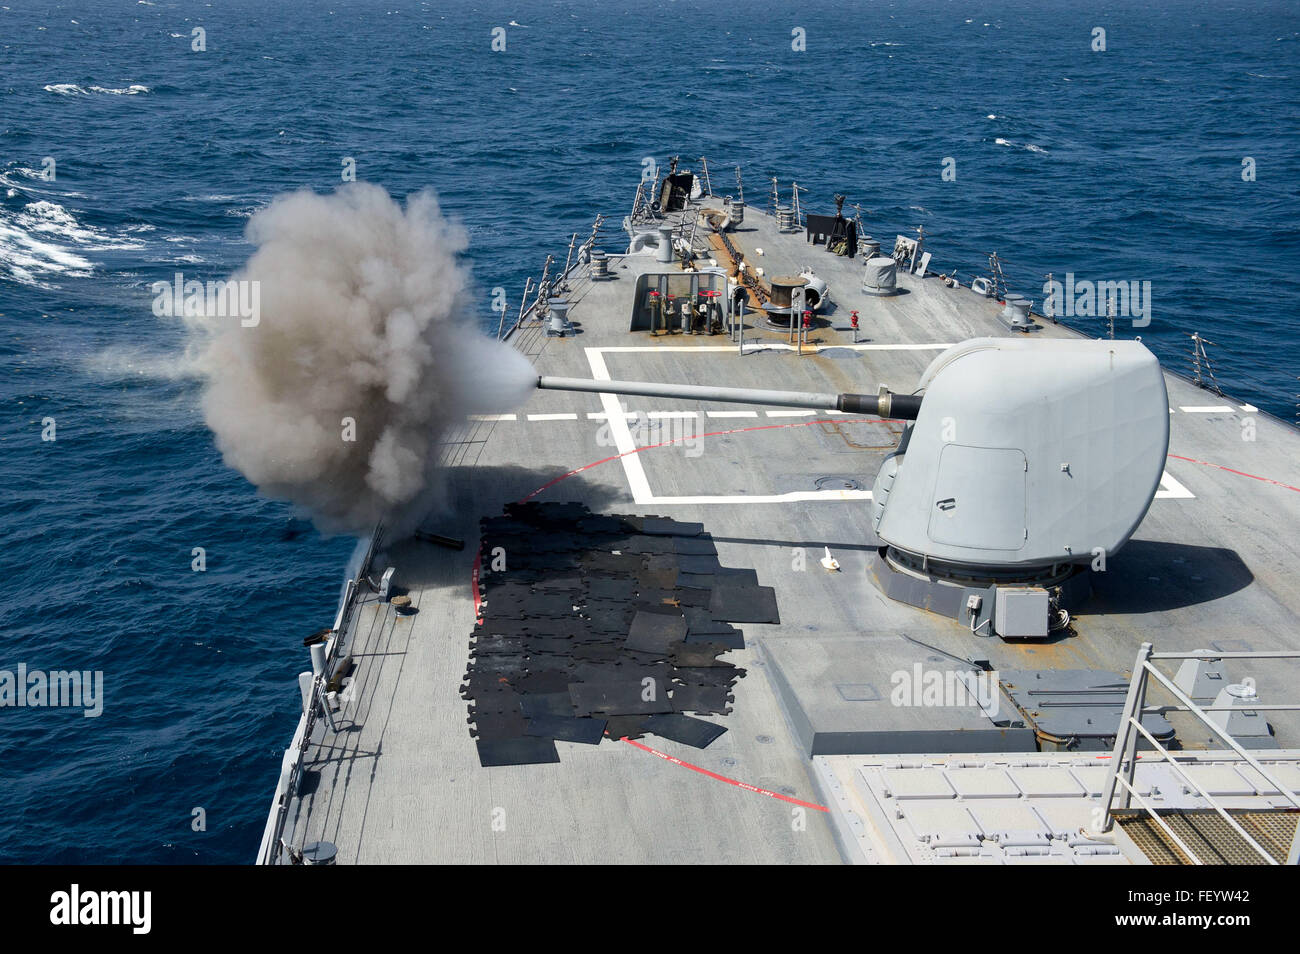 160130-N-VE959-216 INDIAN OCEAN (Jan. 30, 2016) Guided-missile destroyer USS Gonzalez (DDG 66) conducts a live-fire exercise using a MK 45 5-inch gun. Gonzalez is deployed as part of the Harry S. Truman Carrier Strike Group, supporting maritime security operations and theater security cooperation efforts in the U.S. 5th Fleet area of operations. Stock Photo